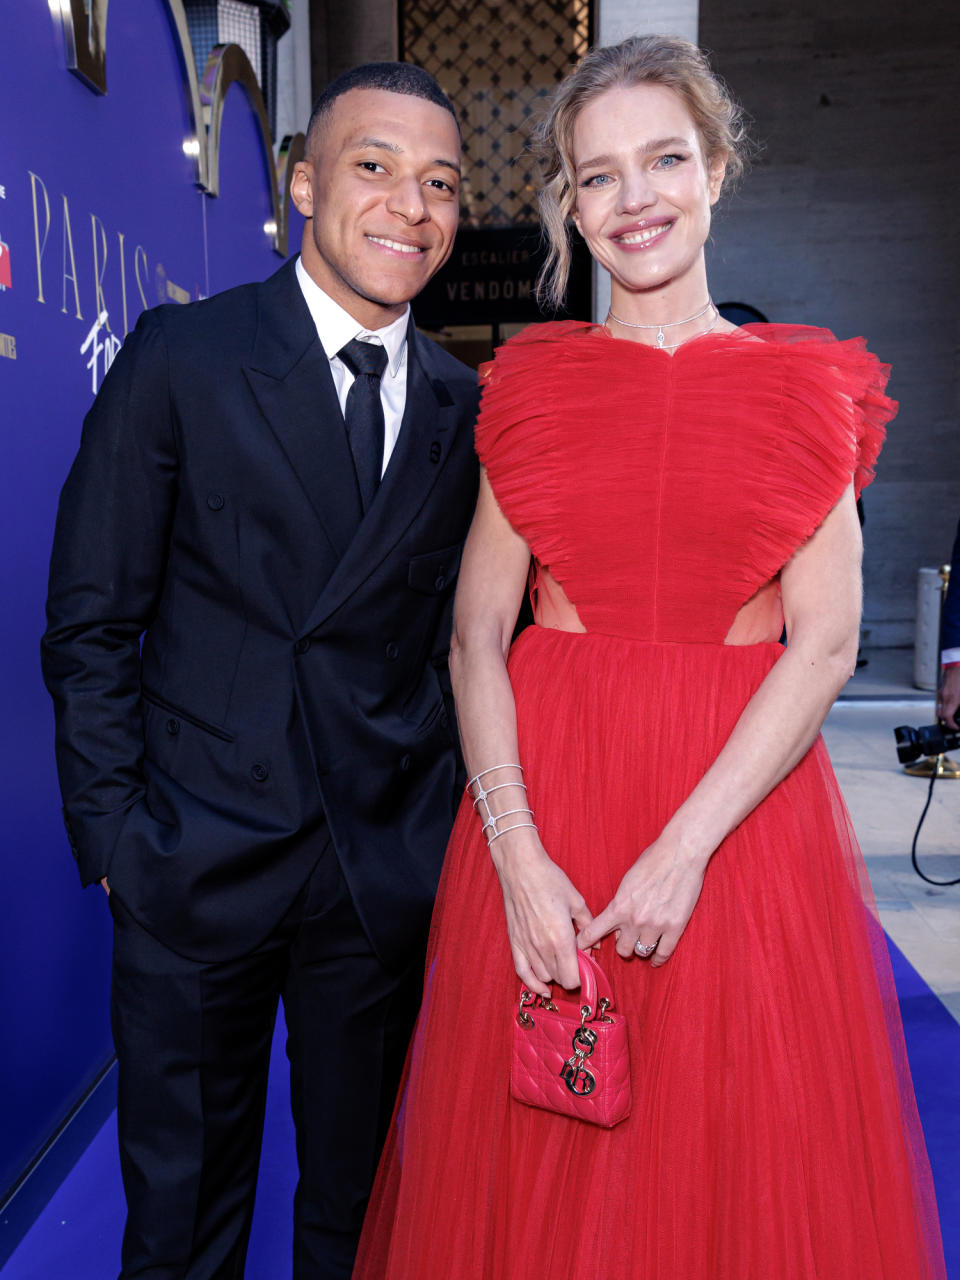 Kylian Mbappé and Natalia Vodianova at the Paris for Good charity fundraiser held at the Place Vendôme on May 16, 2024 in Paris, France.